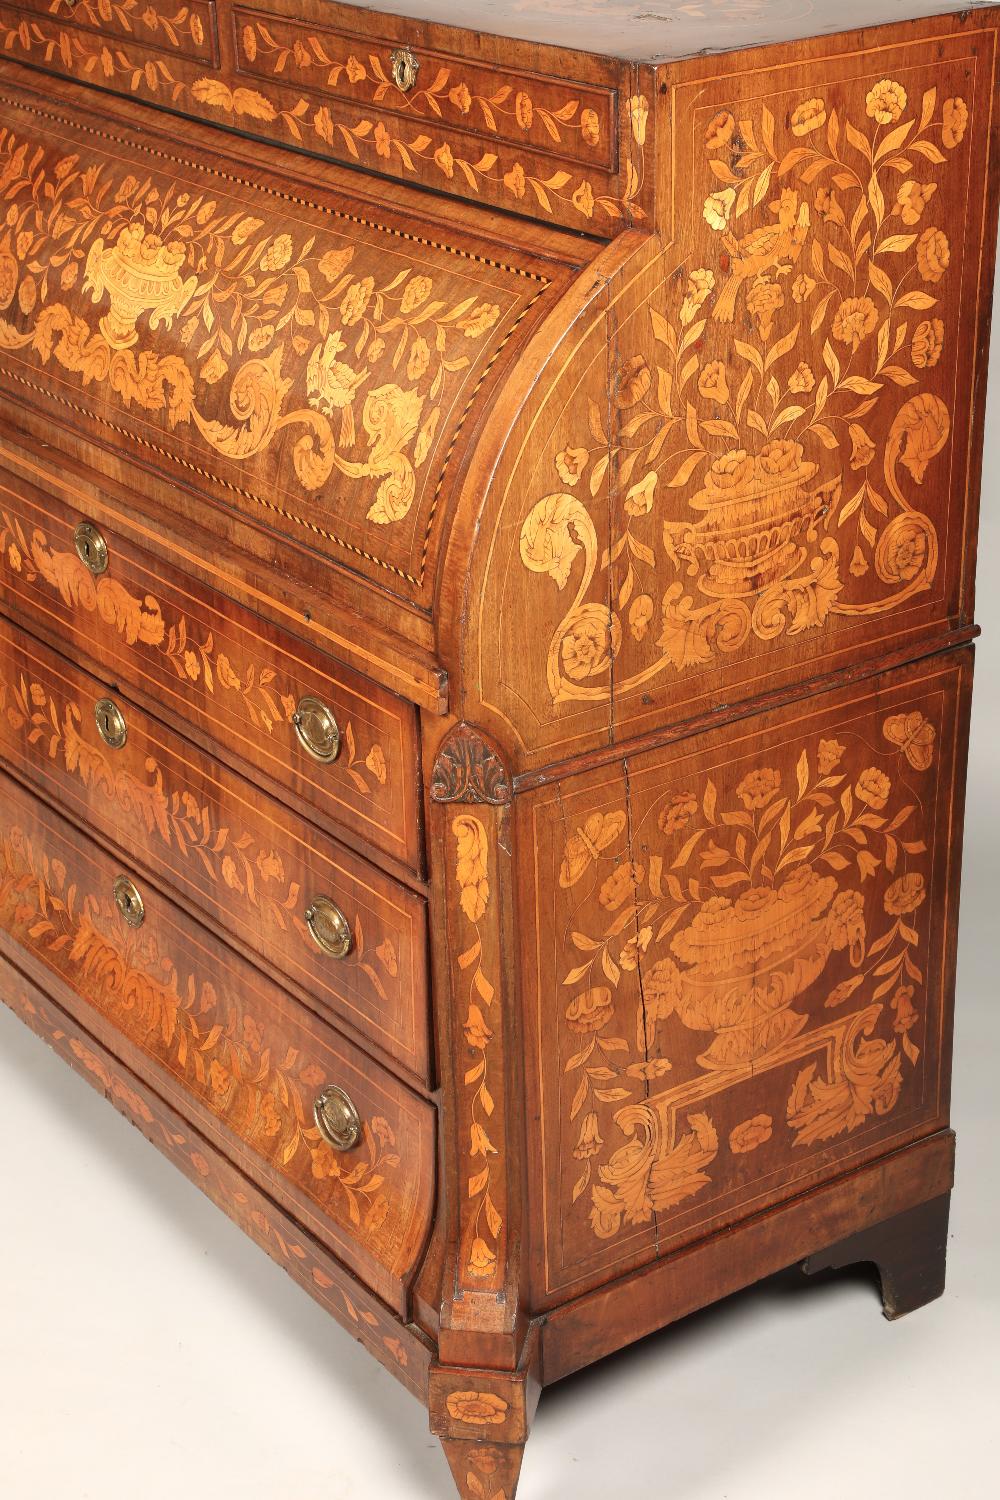 Dutch 19th century marquetry roll top chest, with three drawers, 124 x 123.5 x 57 cm - Image 2 of 9